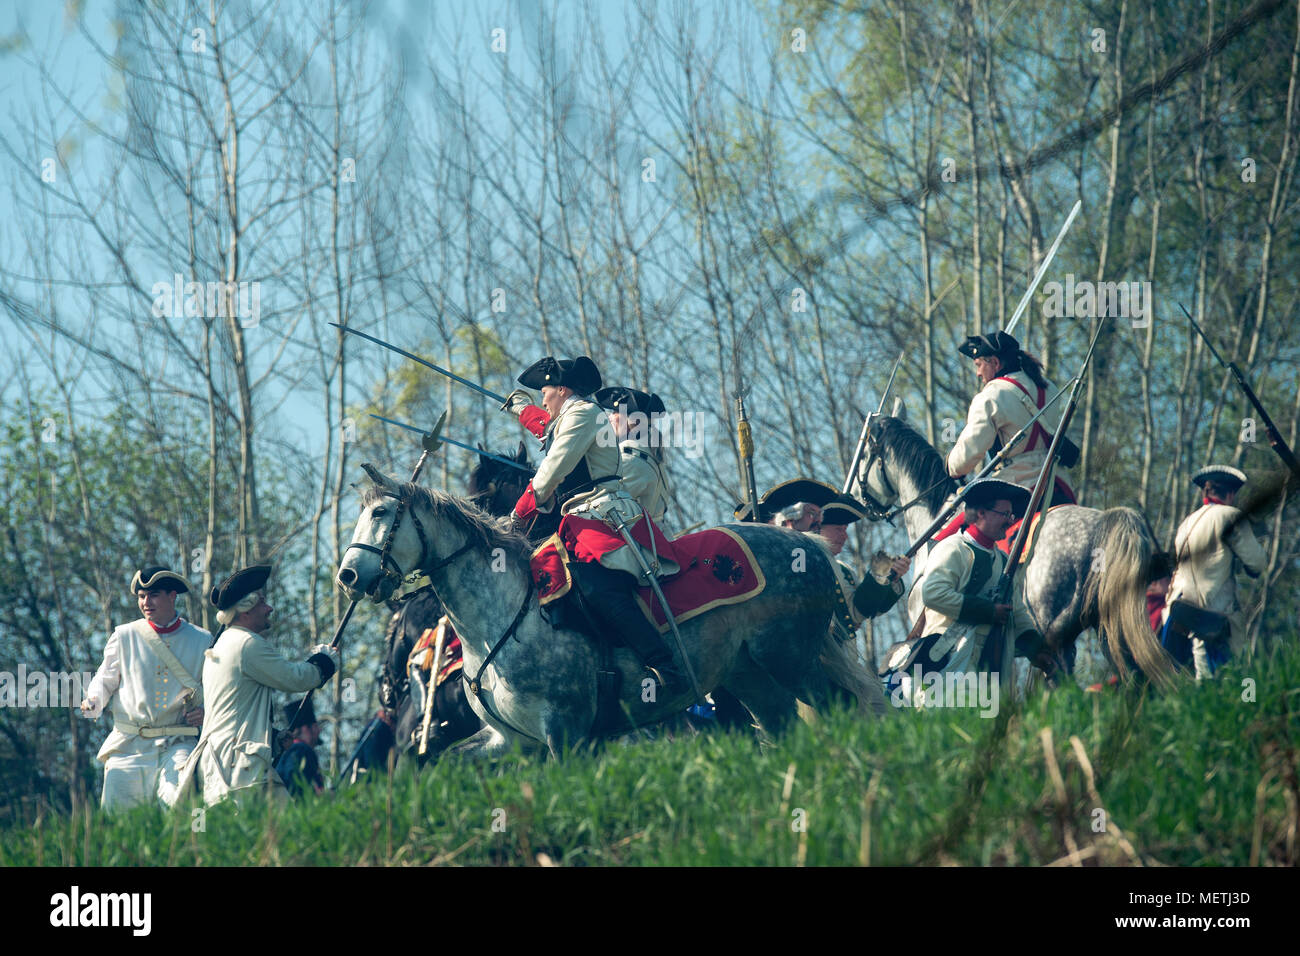 Liberec, Czech Republic. 21st Apr, 2018. Reconstruction of the Battle of Reichenberg, fought on 21 April 1757 within the Third Silesian War, was held in Liberec-Vesec, Czech Republic, on April 21, 2018. Credit: Radek Petrasek/CTK Photo/Alamy Live News Stock Photo